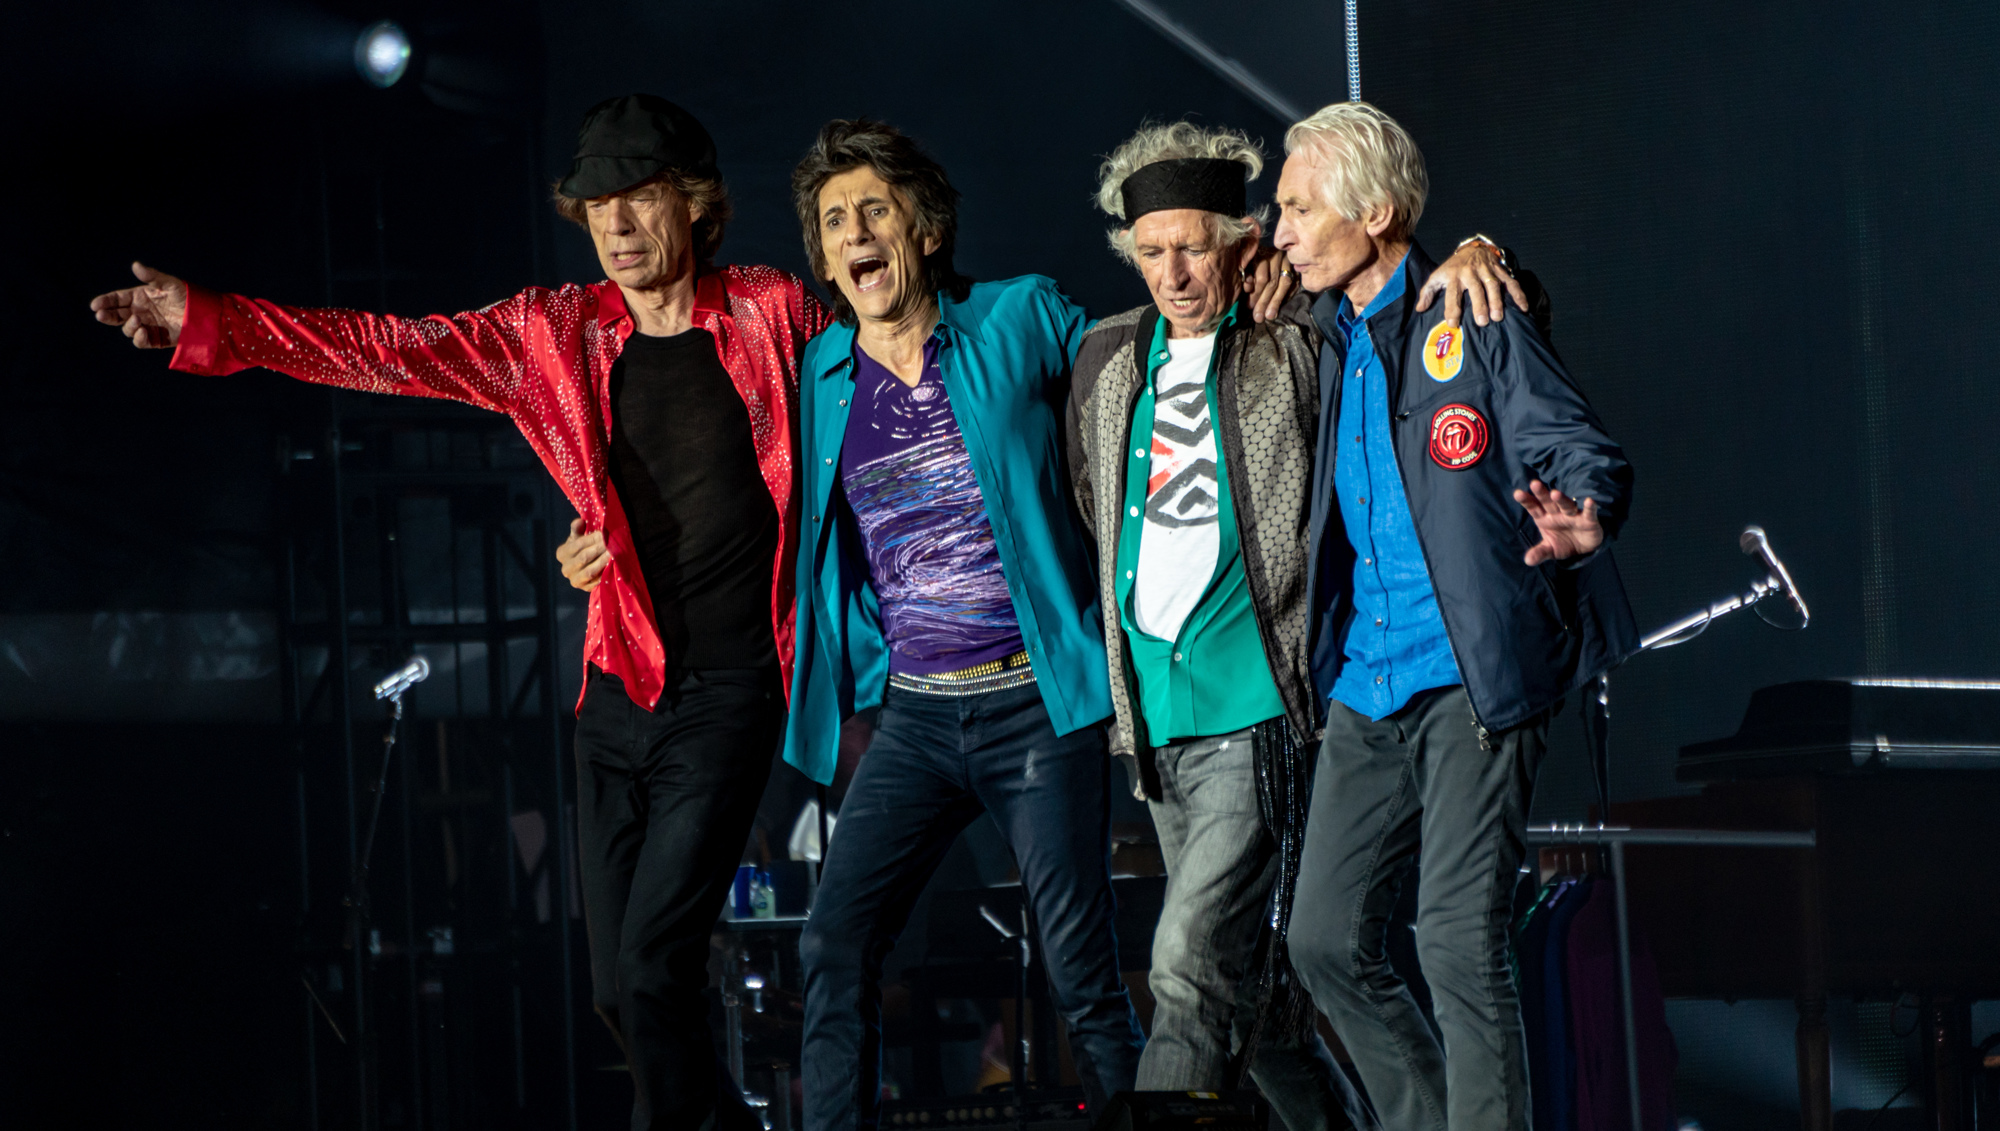 Wikimedia/Raph_PH. The Rolling Stones drummer Charlie Watts, far right, died earlier this year, leaving Mick Jagger, Ronnie Wood and Keith Richards as the sole surviving original members of the band.